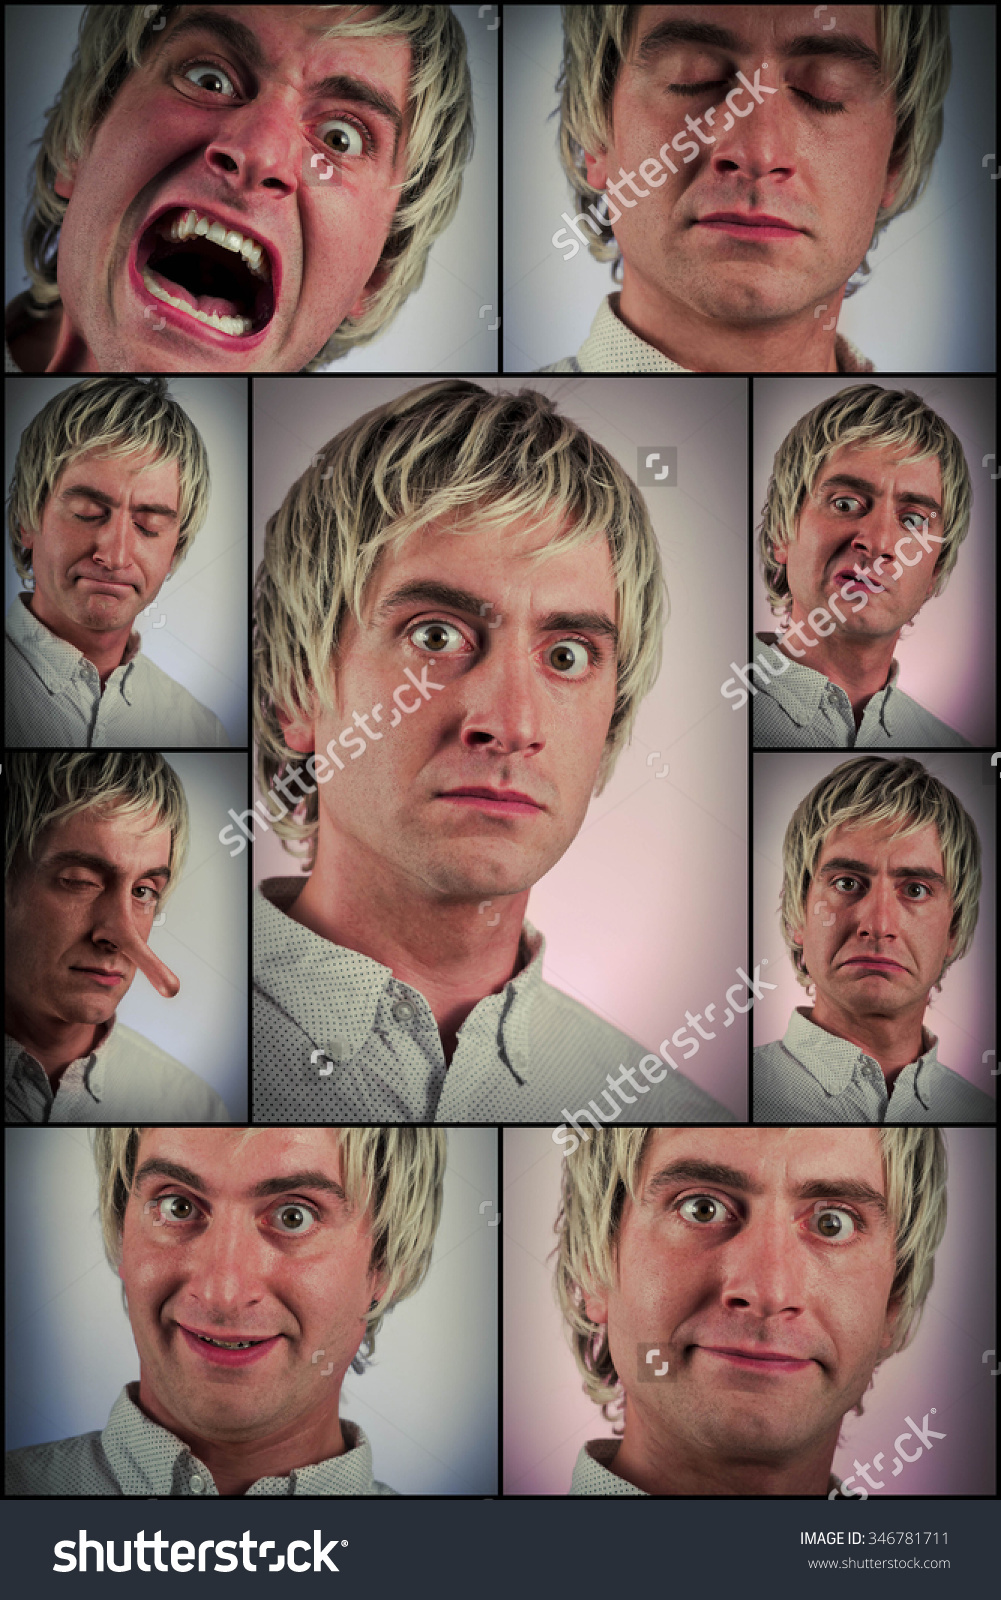 stock-photo-silly-man-making-various-facial-expressions-in-collage-imagery-346781711